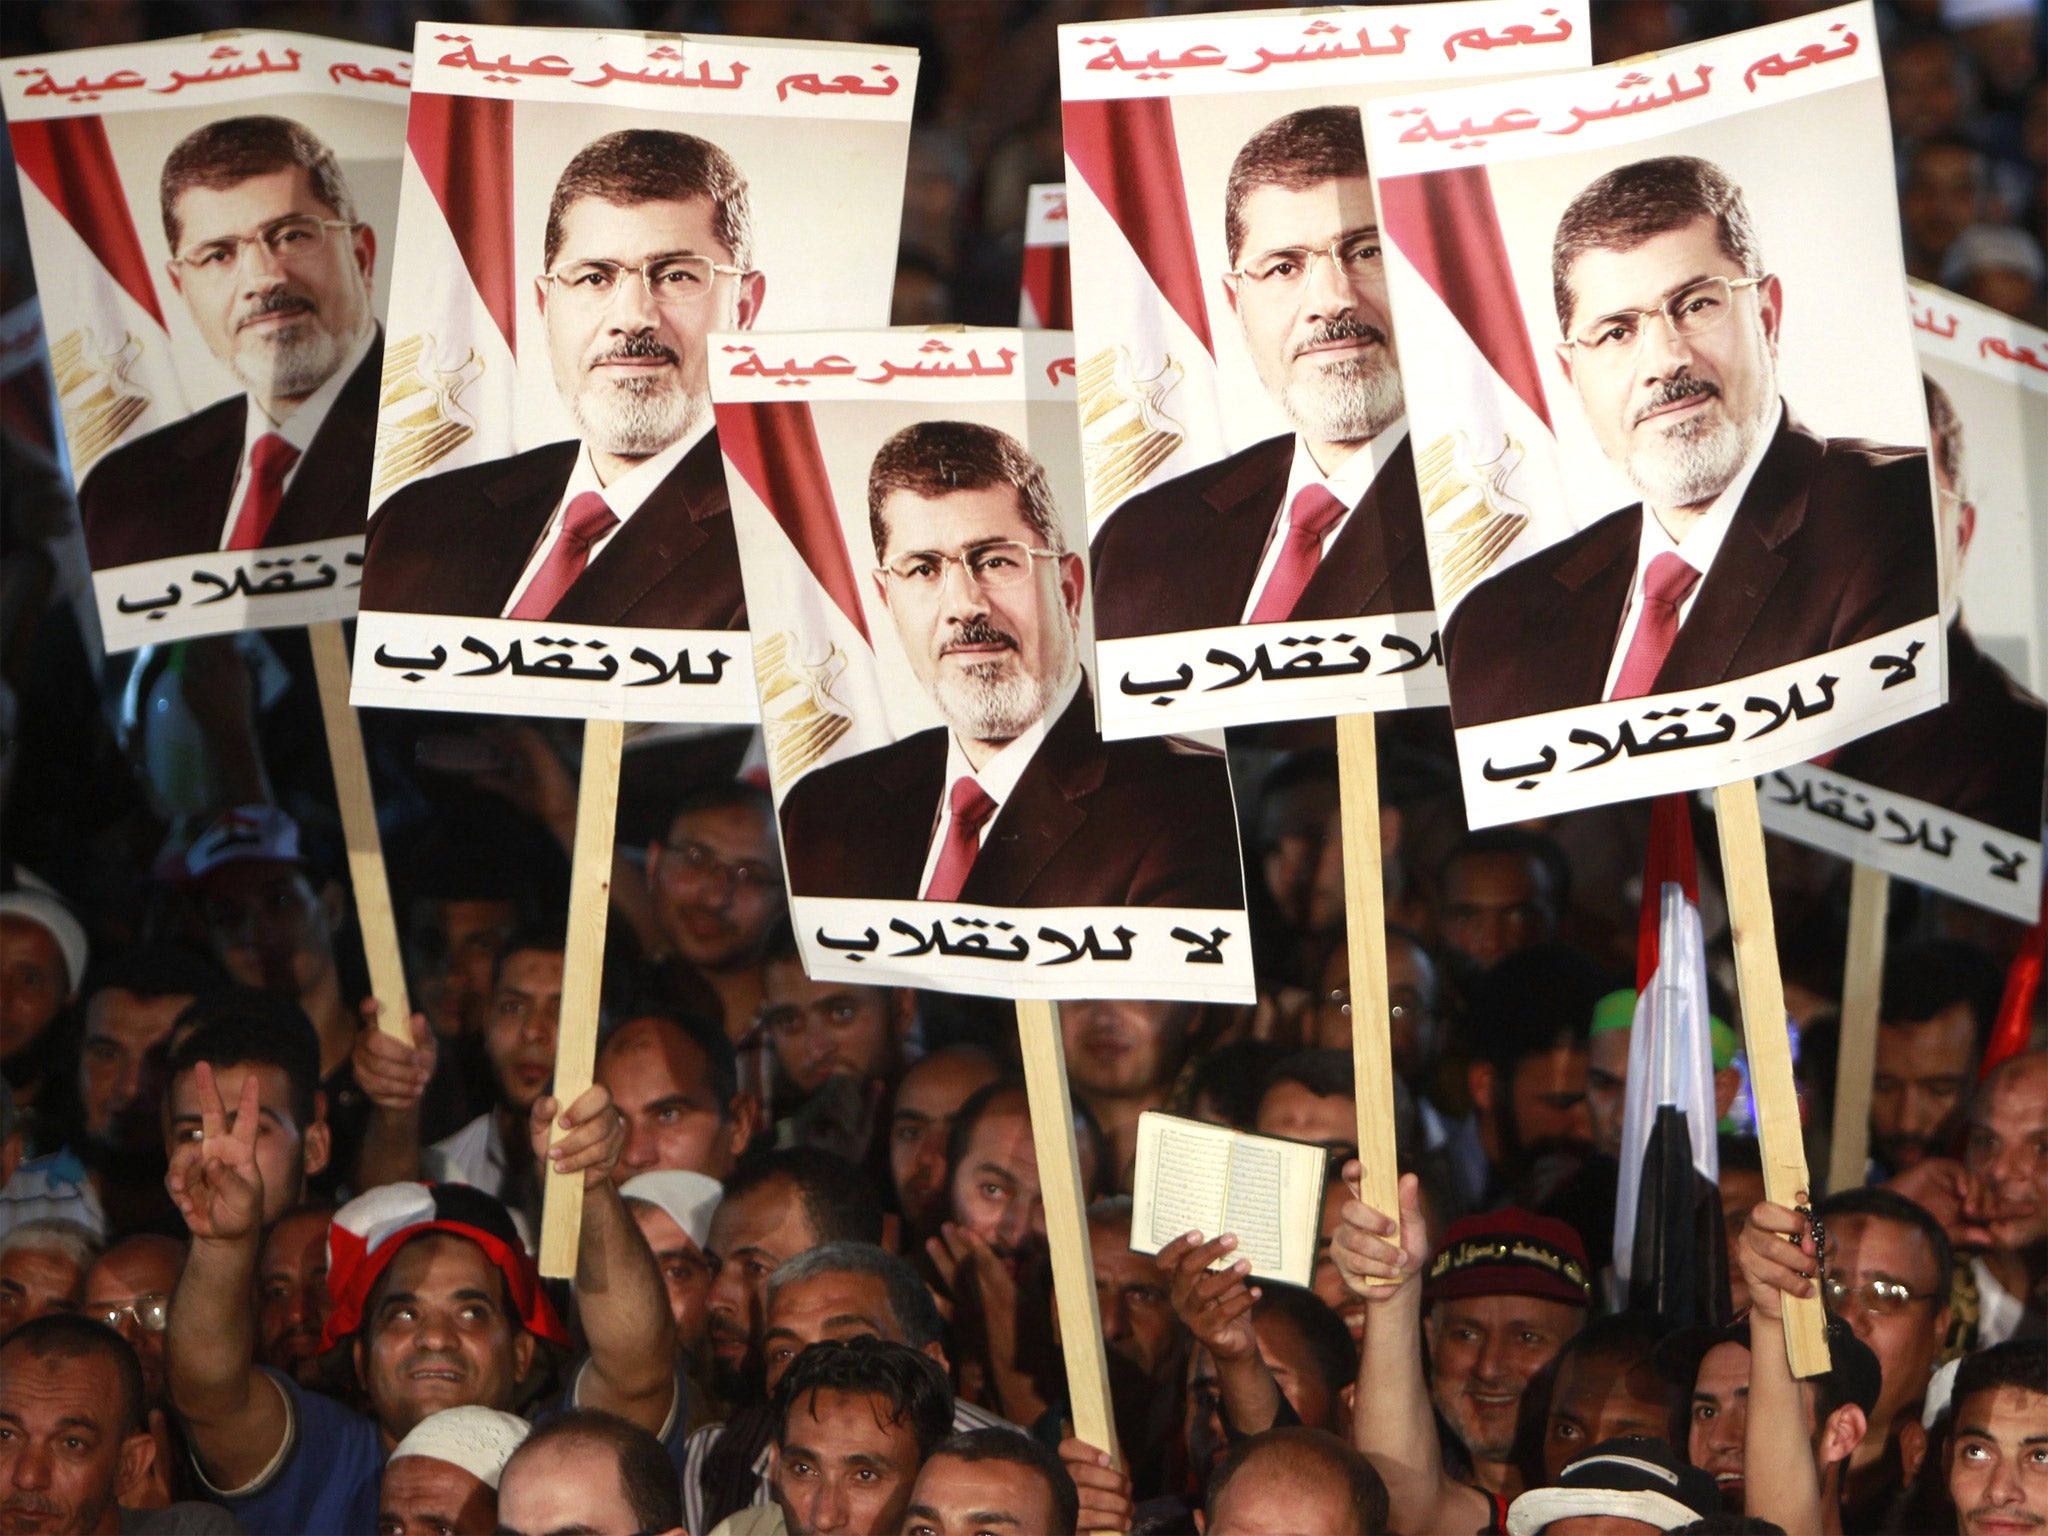 Supporters of deposed President Mohamed Morsi protest at Rabaa al-Adawiya square in Cairo